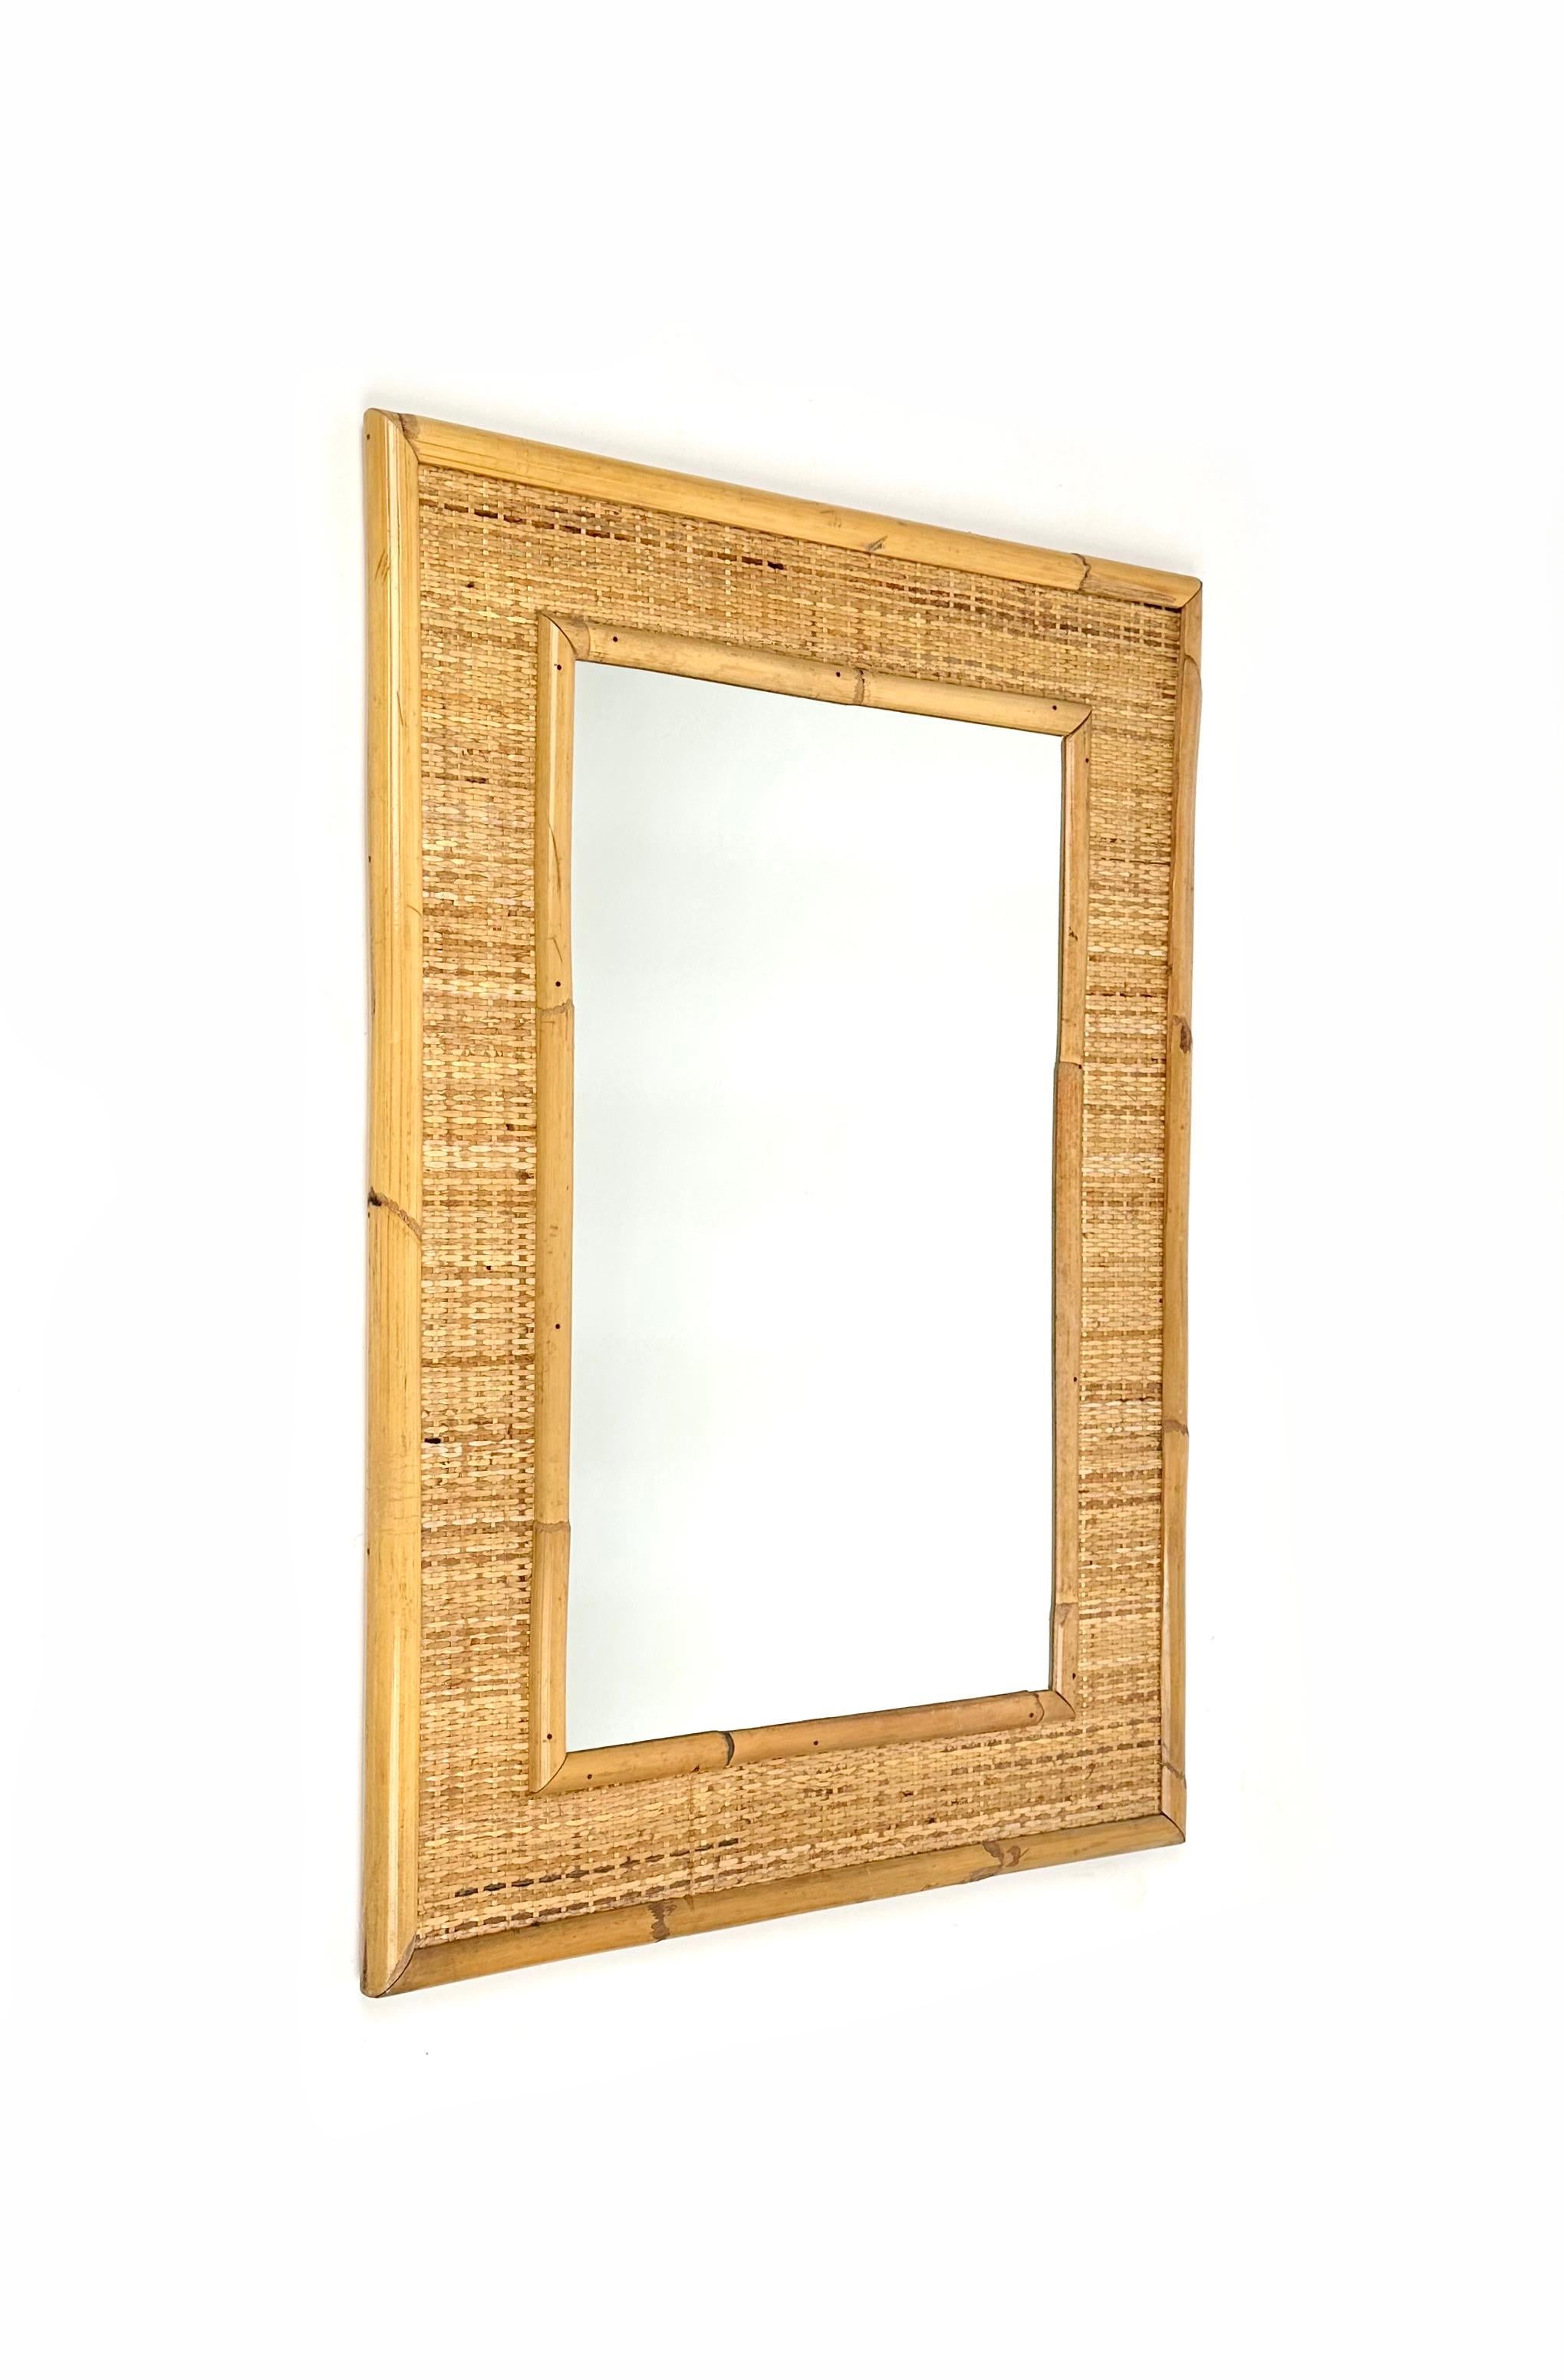 Midcentury rectangular wall mirror in bamboo and rattan.

Made in Italy in the 1960s.